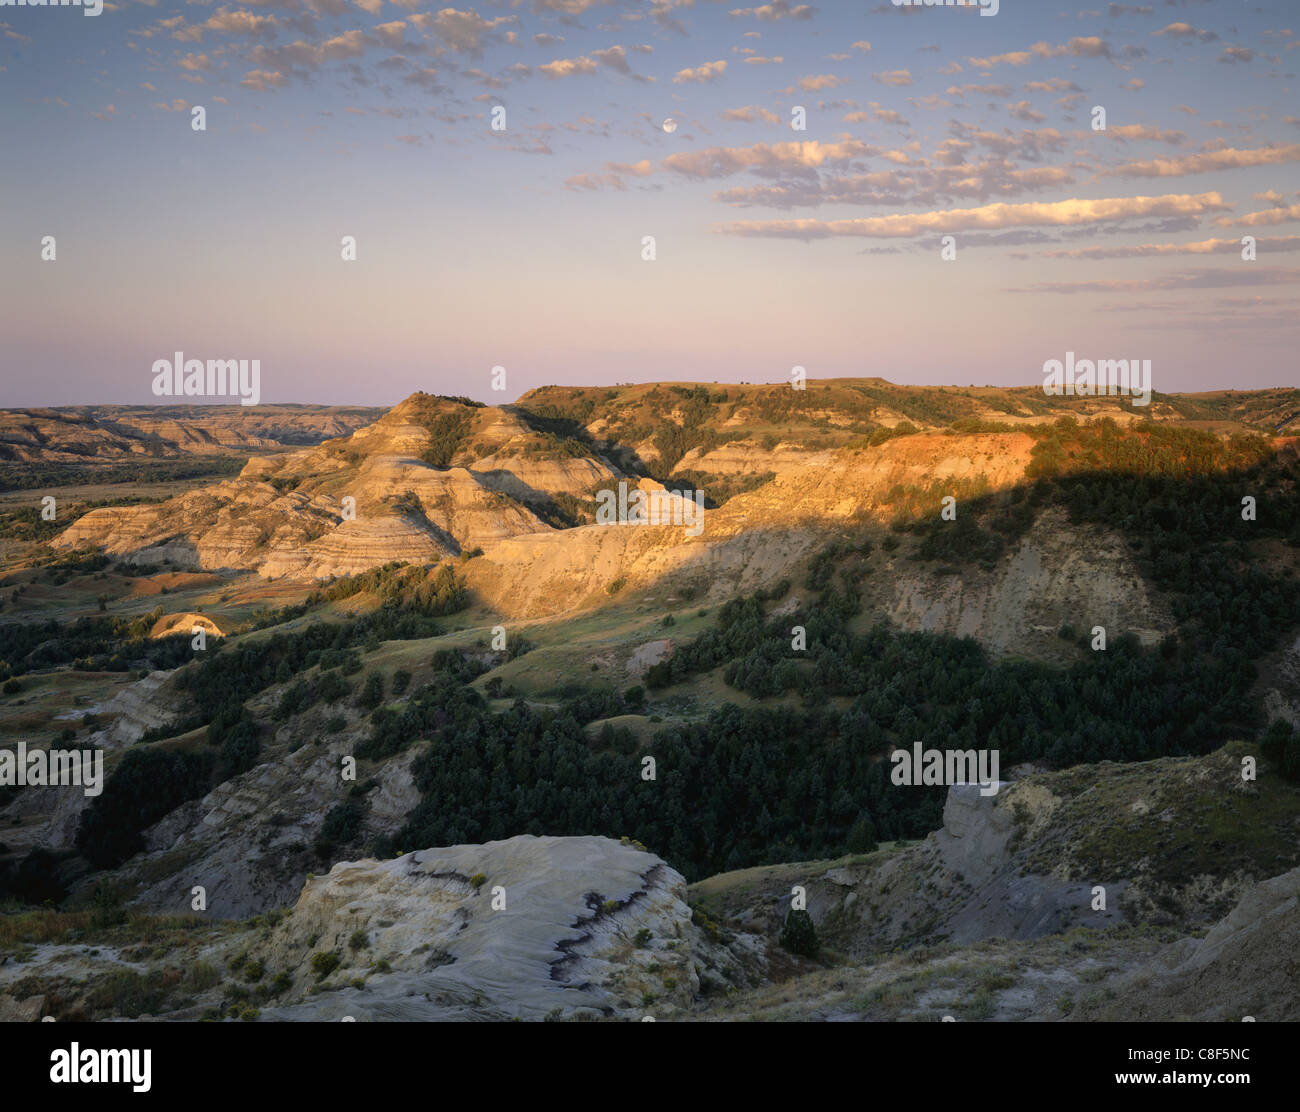 AA02180-01...NORTH DAKOTA - View of the Little Missouri River valley from Oxbow Overlook in Theodore Roosevelt National Park. Stock Photo